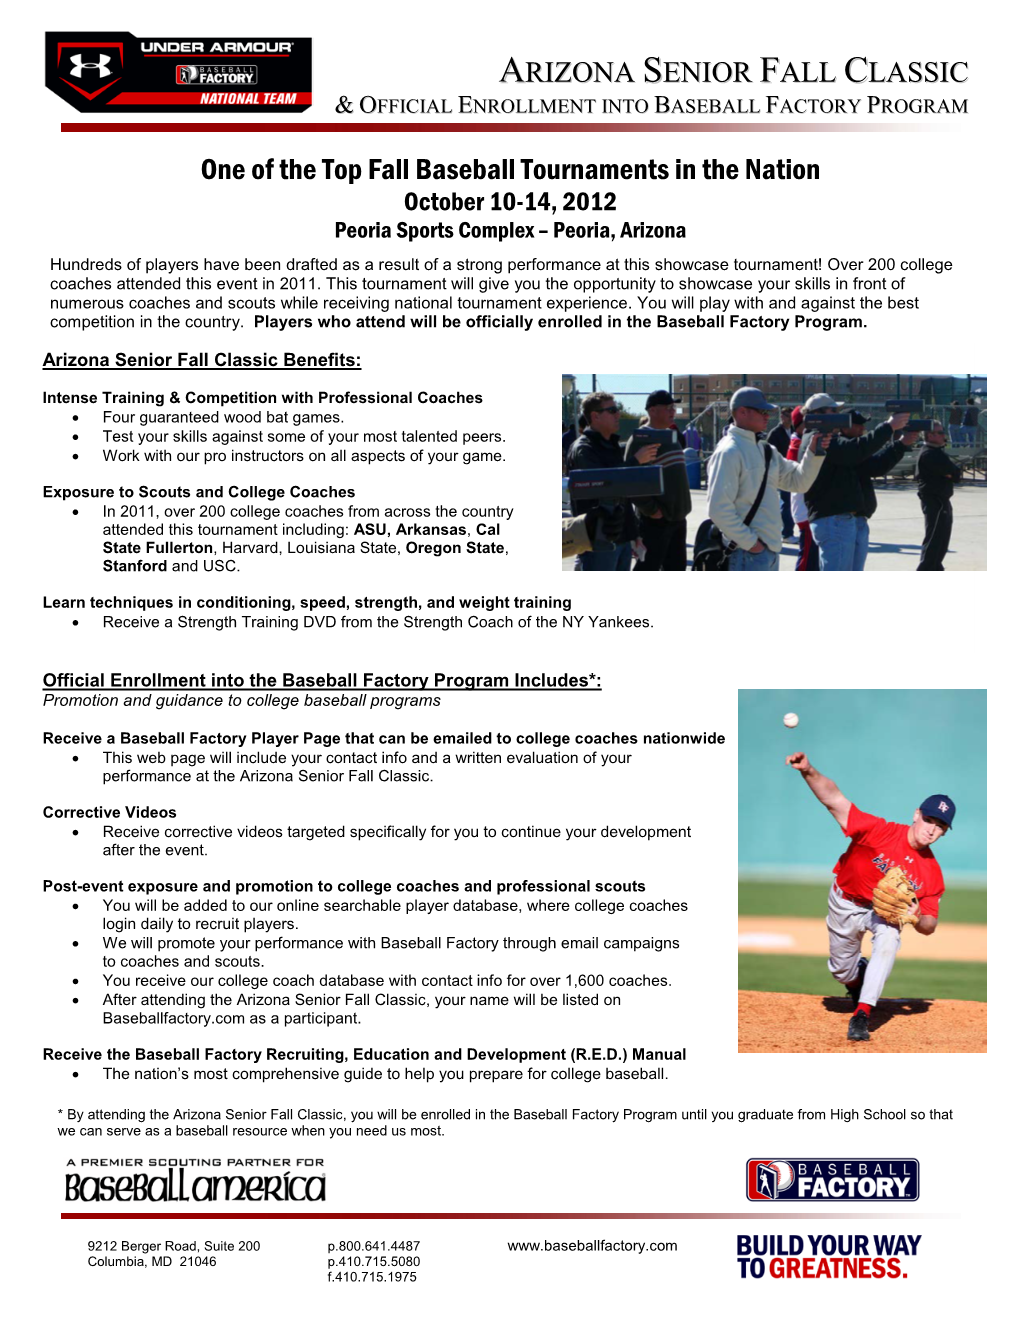 One of the Top Fall Baseball Tournaments In